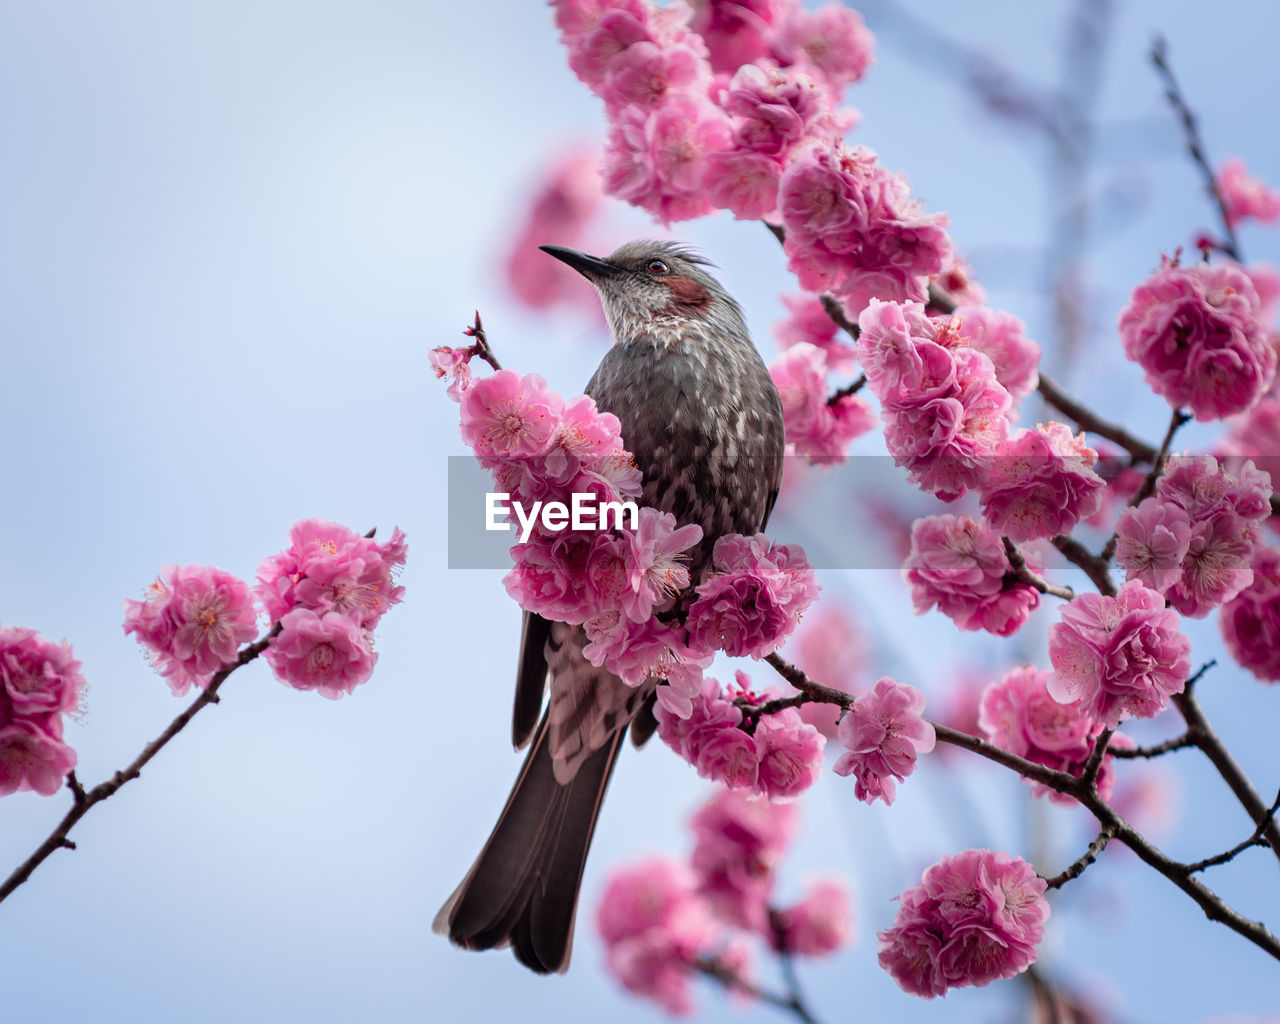 A little beautiful birds sits on a branch of a japanese flowering plum tree